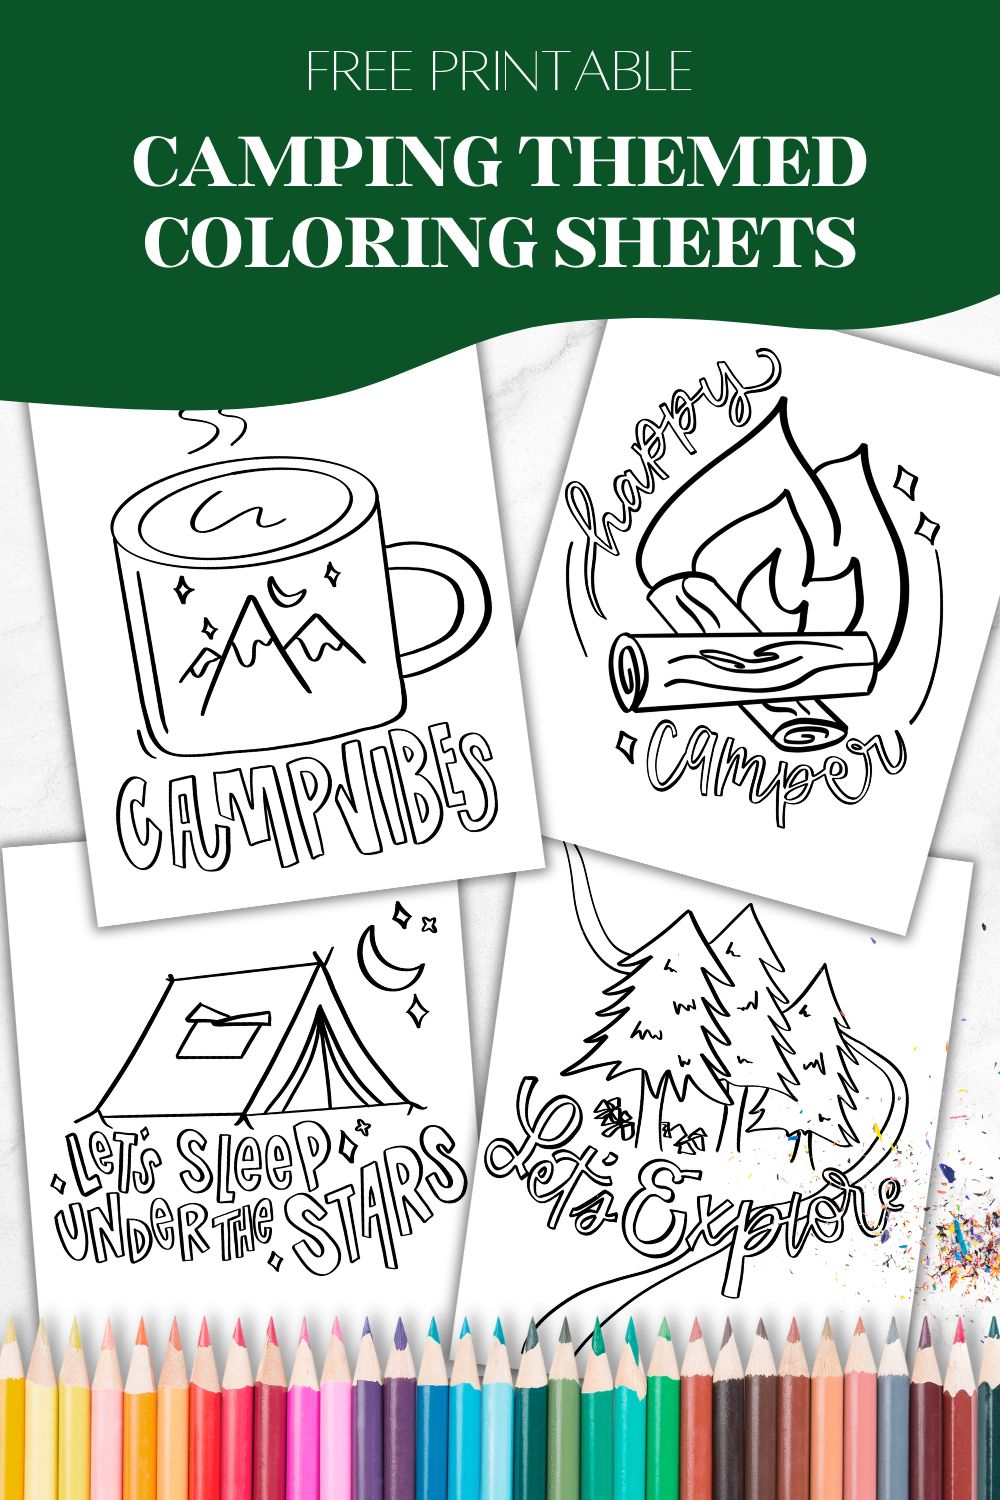 4 camping coloring sheets on marble countertop with pencil crayons. Coloring sheets designed with chunky brush lettering style with hand lettered phrases like 'camp vibes', 'happy camper' 'let's sleep under the stars' and 'let's explore' with line illustrations ready for coloring of a camp mug, campfire, tent under the night sky and trees with hiking trail. Text over reads: free printable camping themed coloring sheets